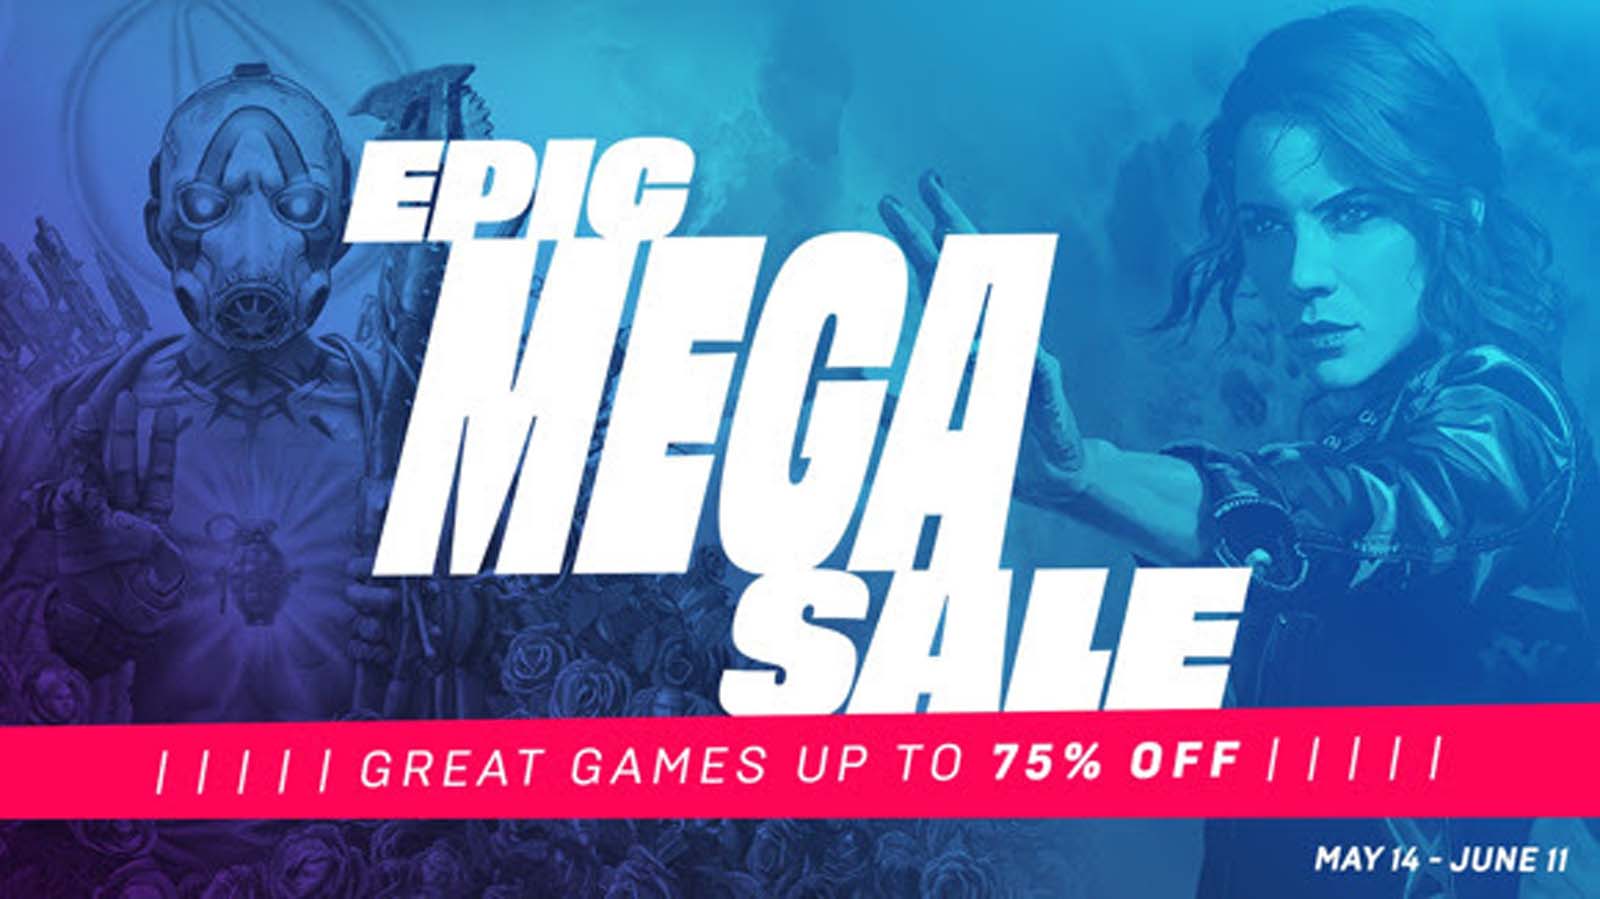 The Epic Games Mega Sale gives PC and Mac gamers huge discounts on